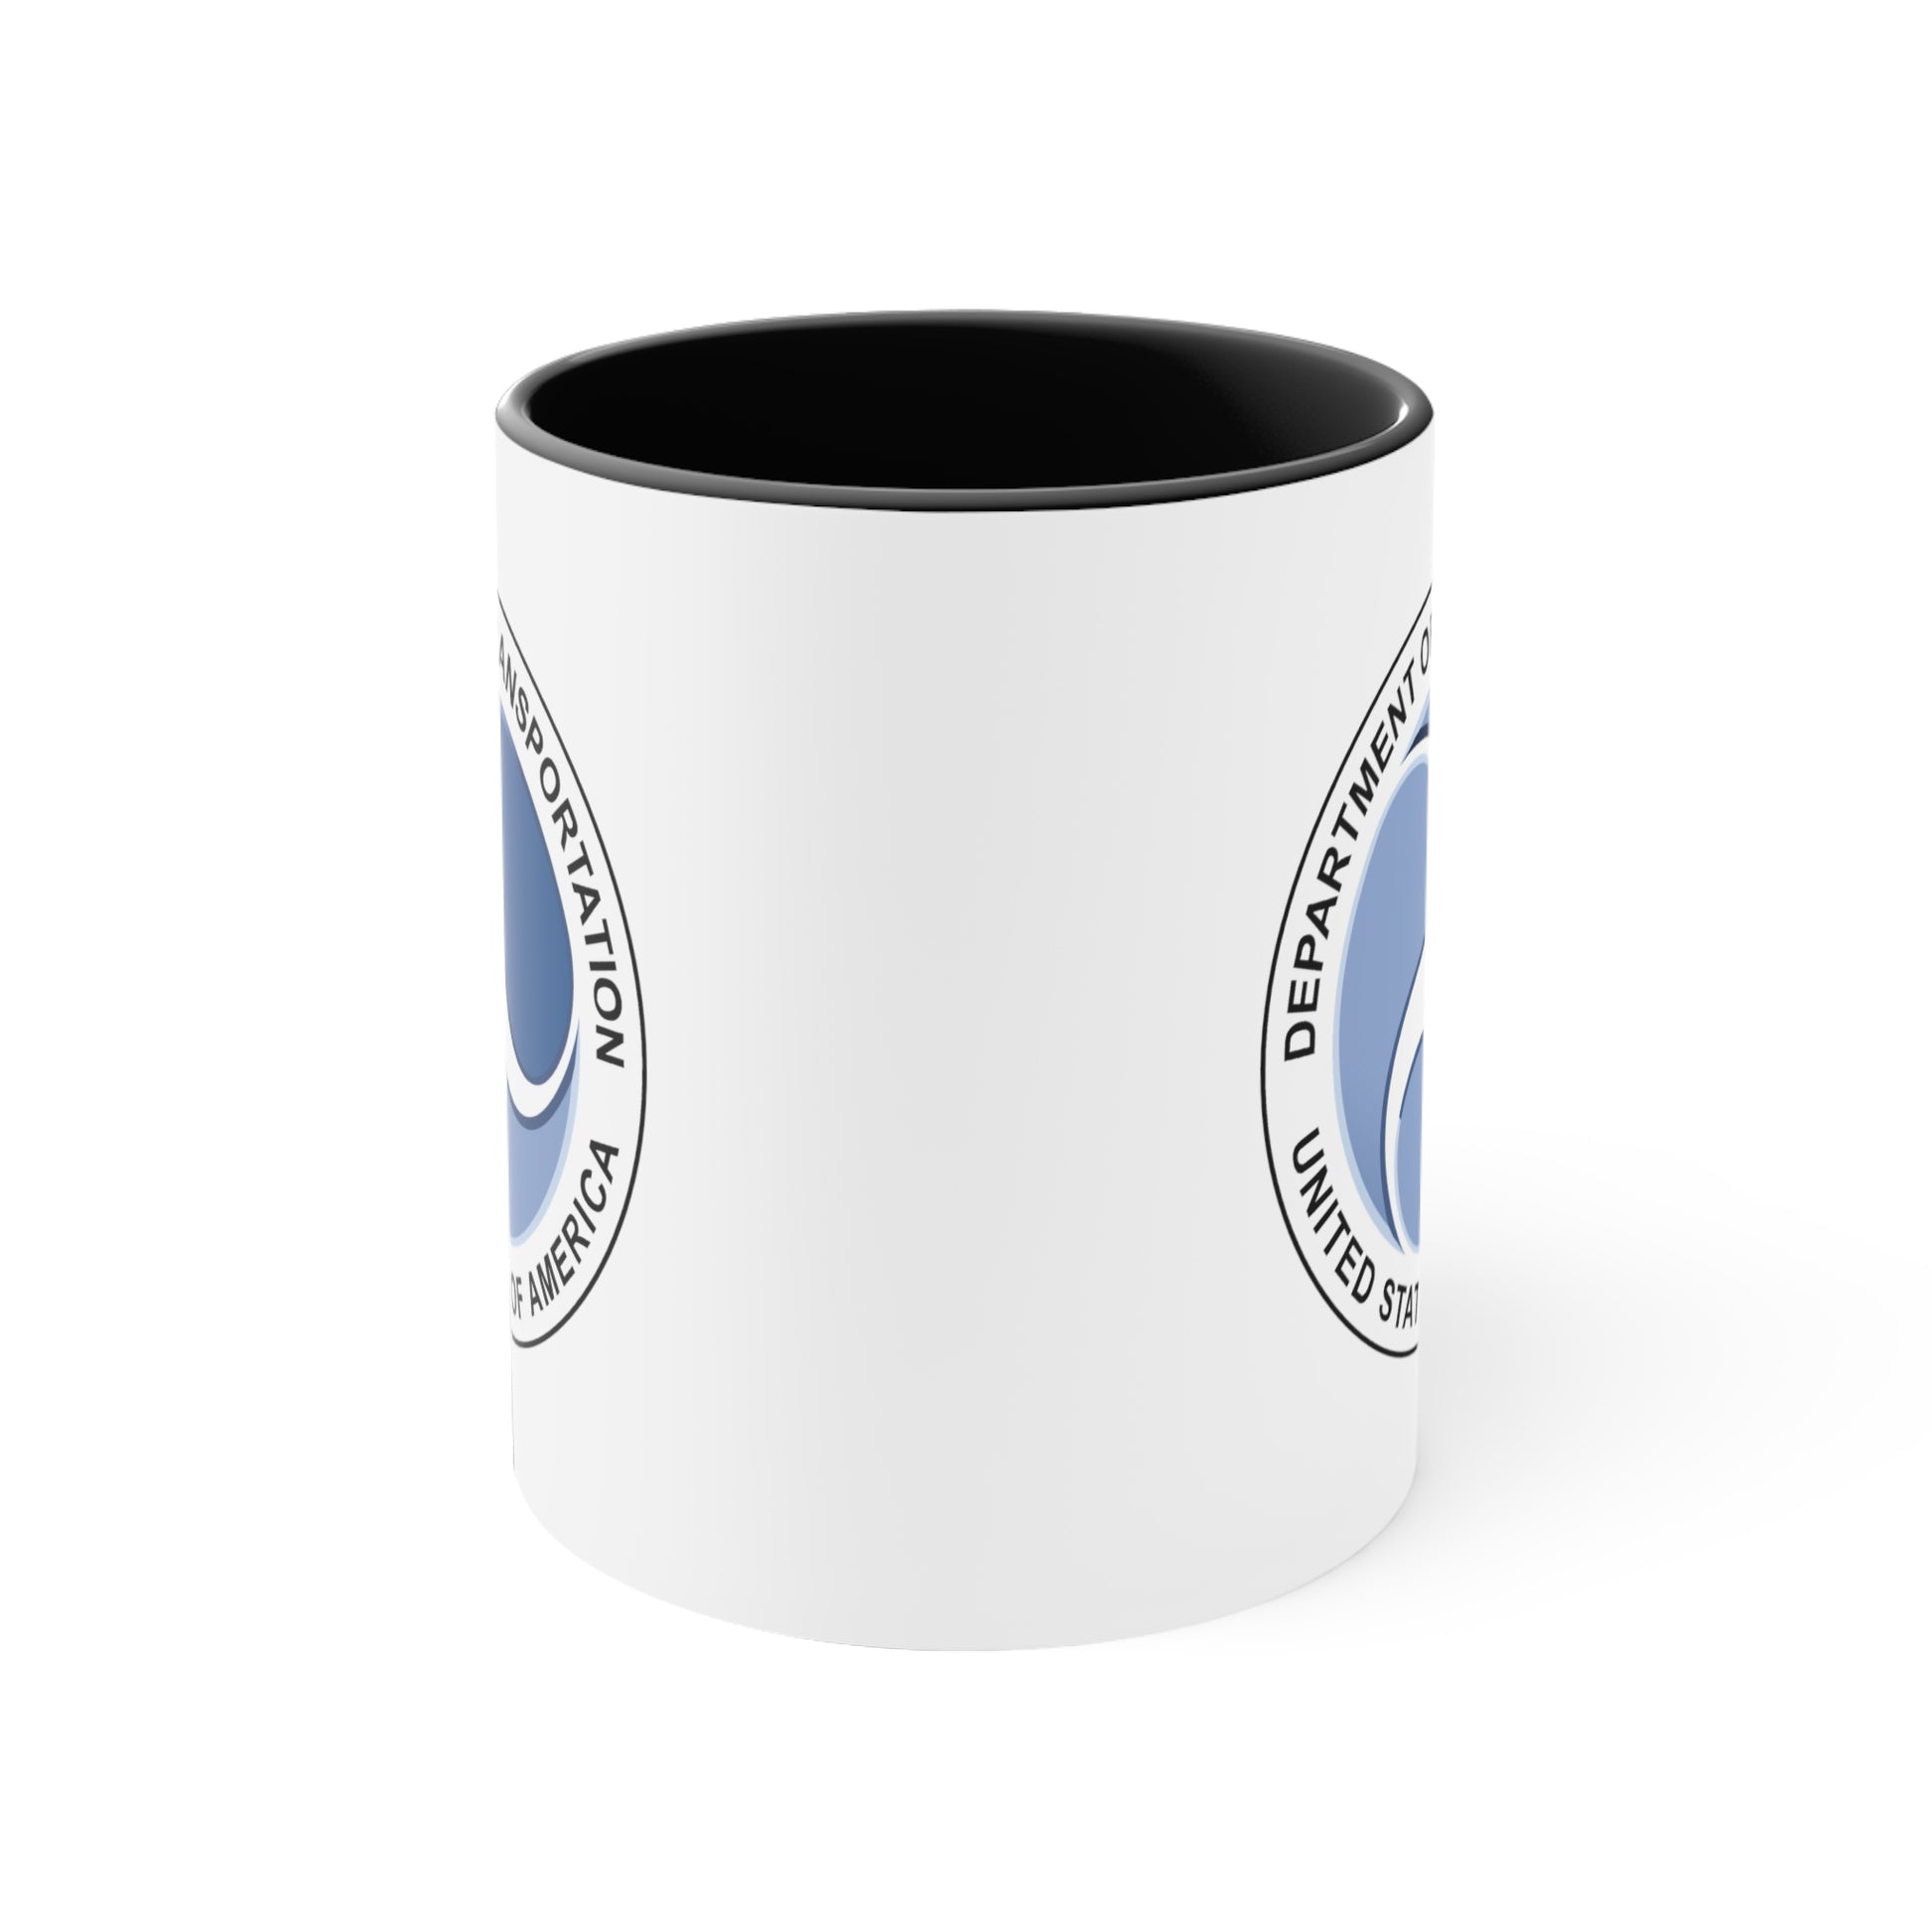 Department of Transportation Coffee Mug - Double Sided Black Accent 11oz by TheGlassyLass.com